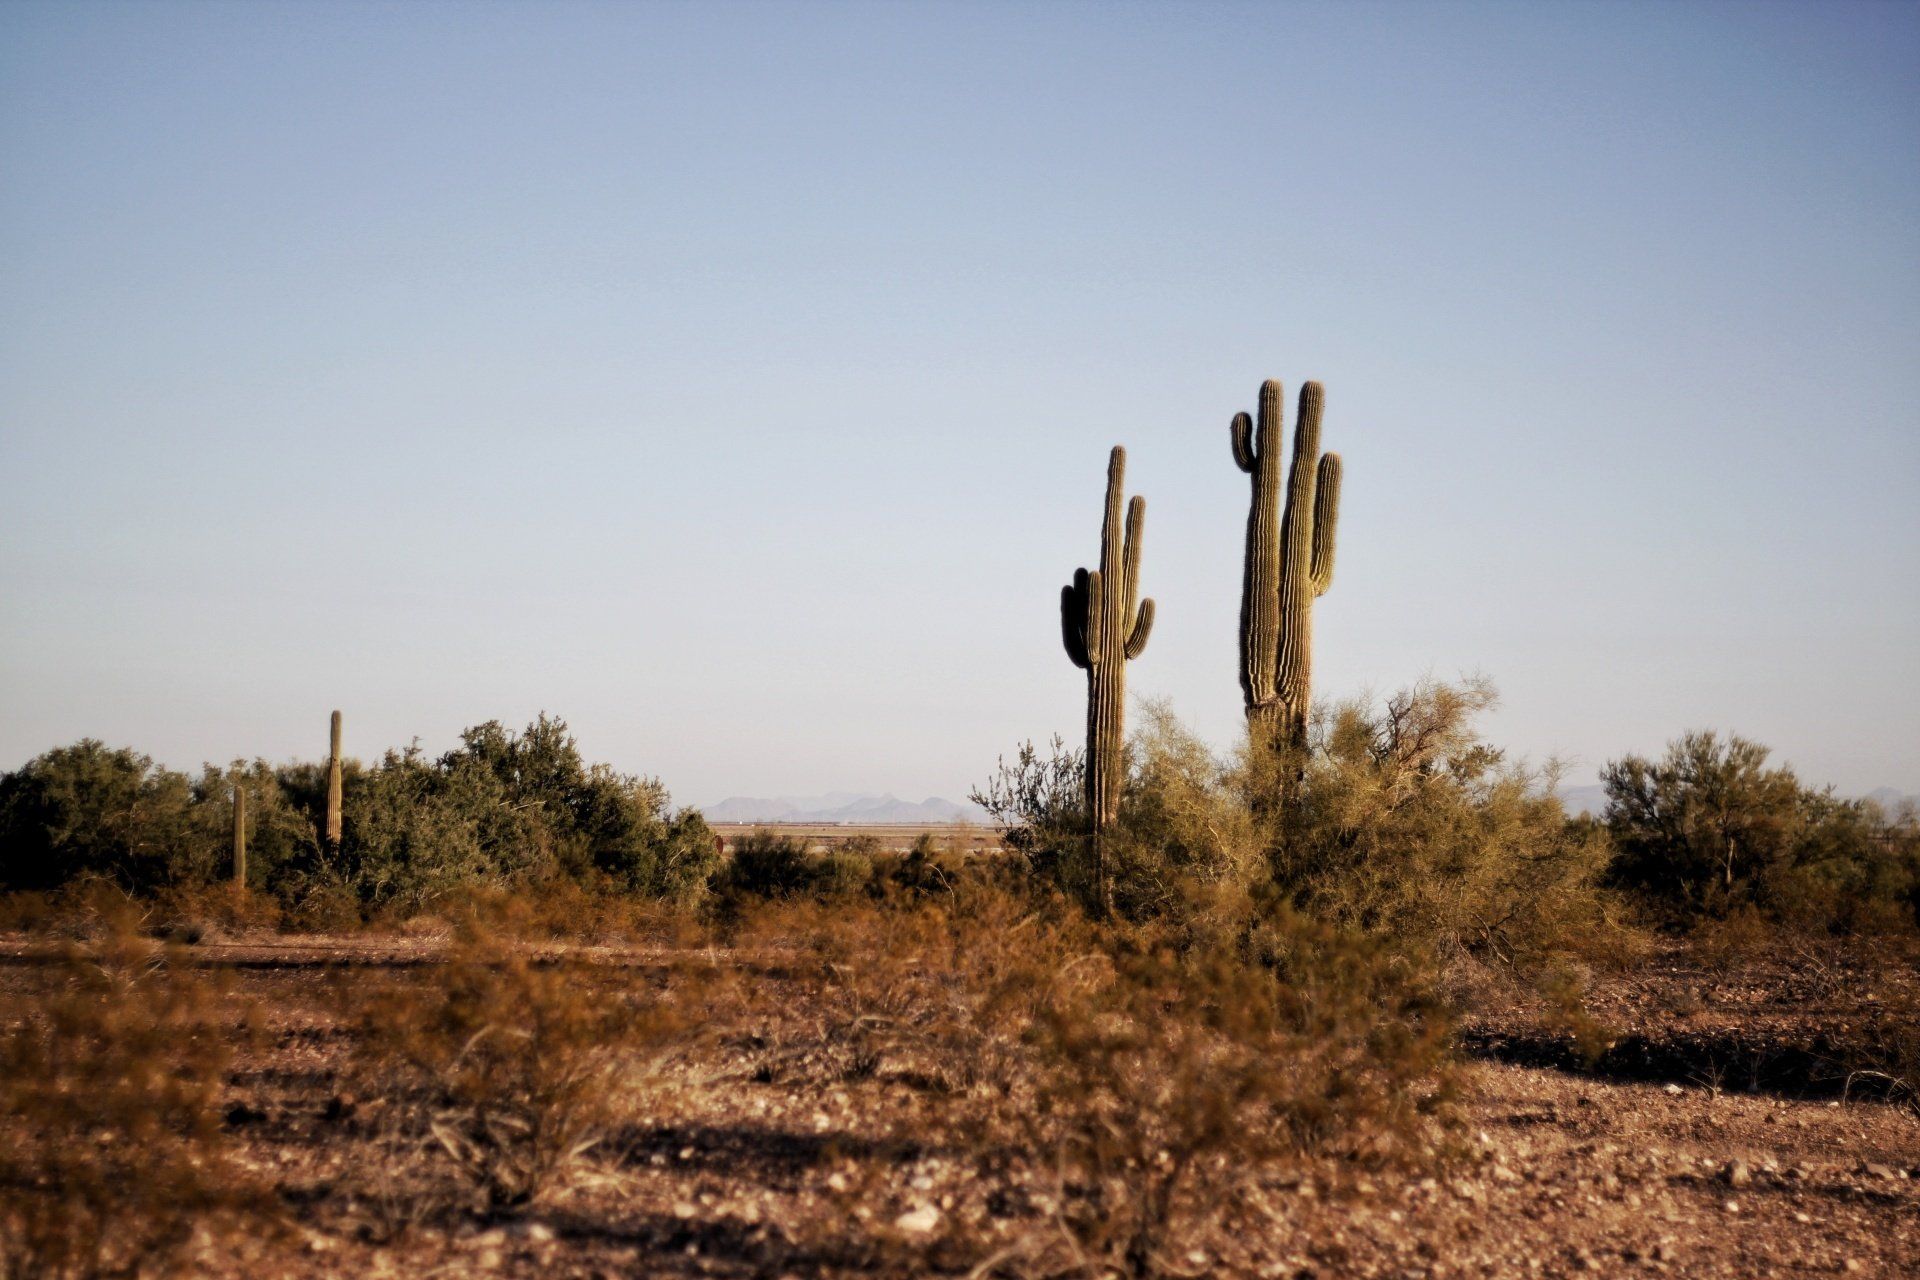 Two saguaro cactus are standing in the middle of a desert.